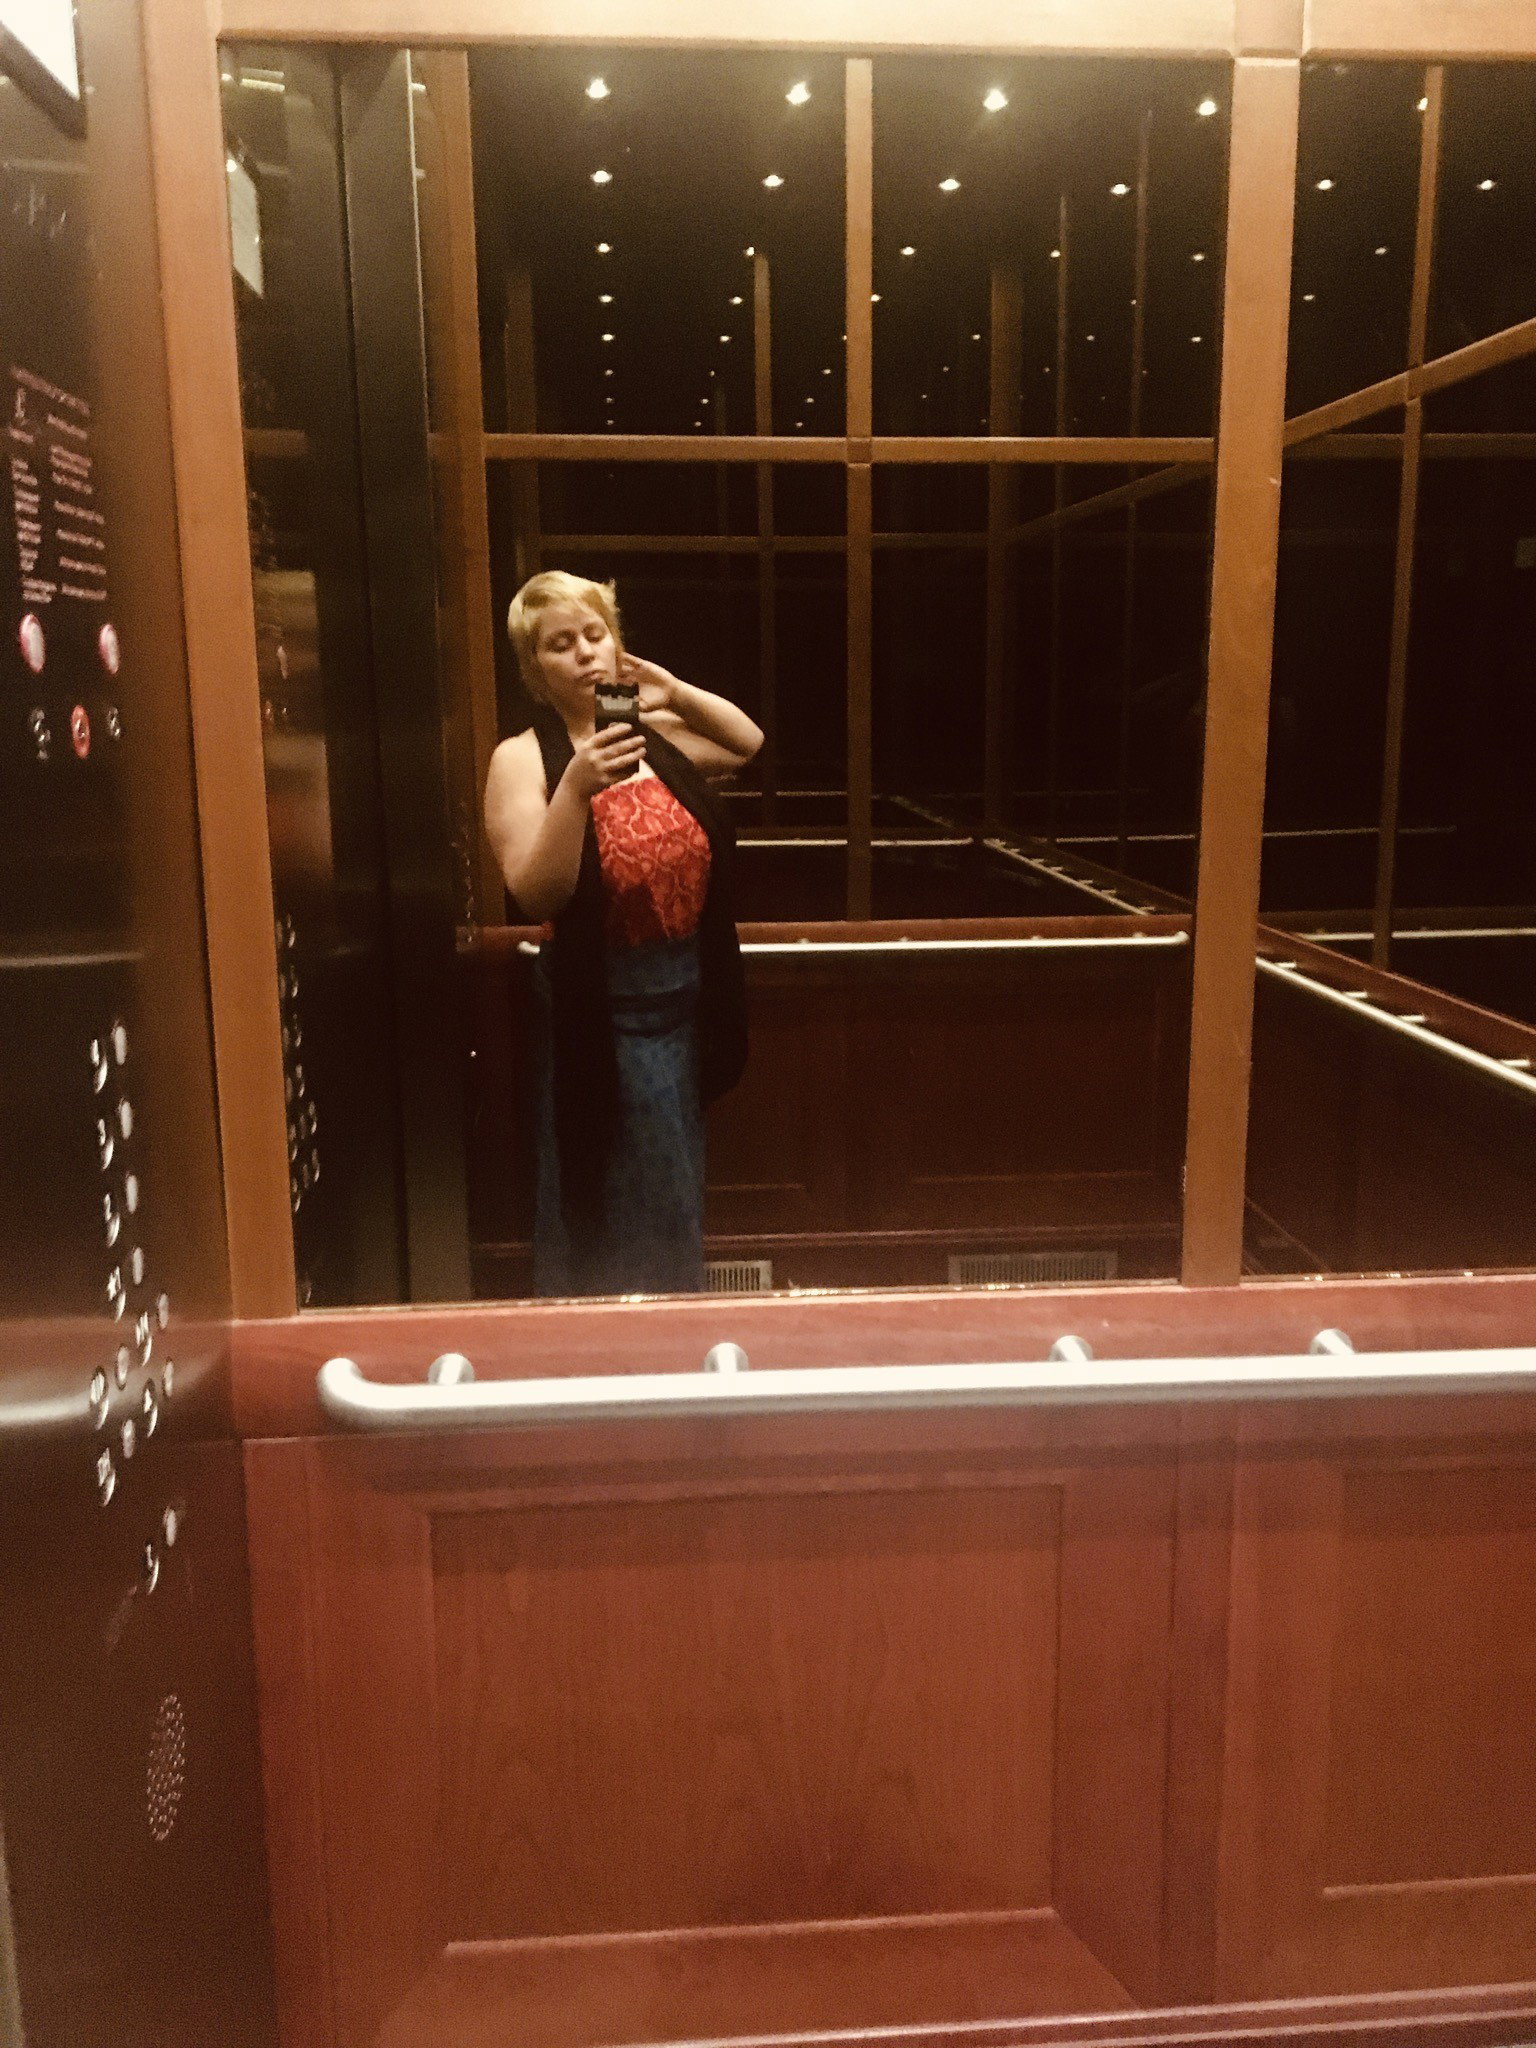 Photo by Elizabitch with the username @Elizabitch, who is a star user,  February 11, 2020 at 7:25 PM and the text says 'What would you do with me alone in this elevator?'